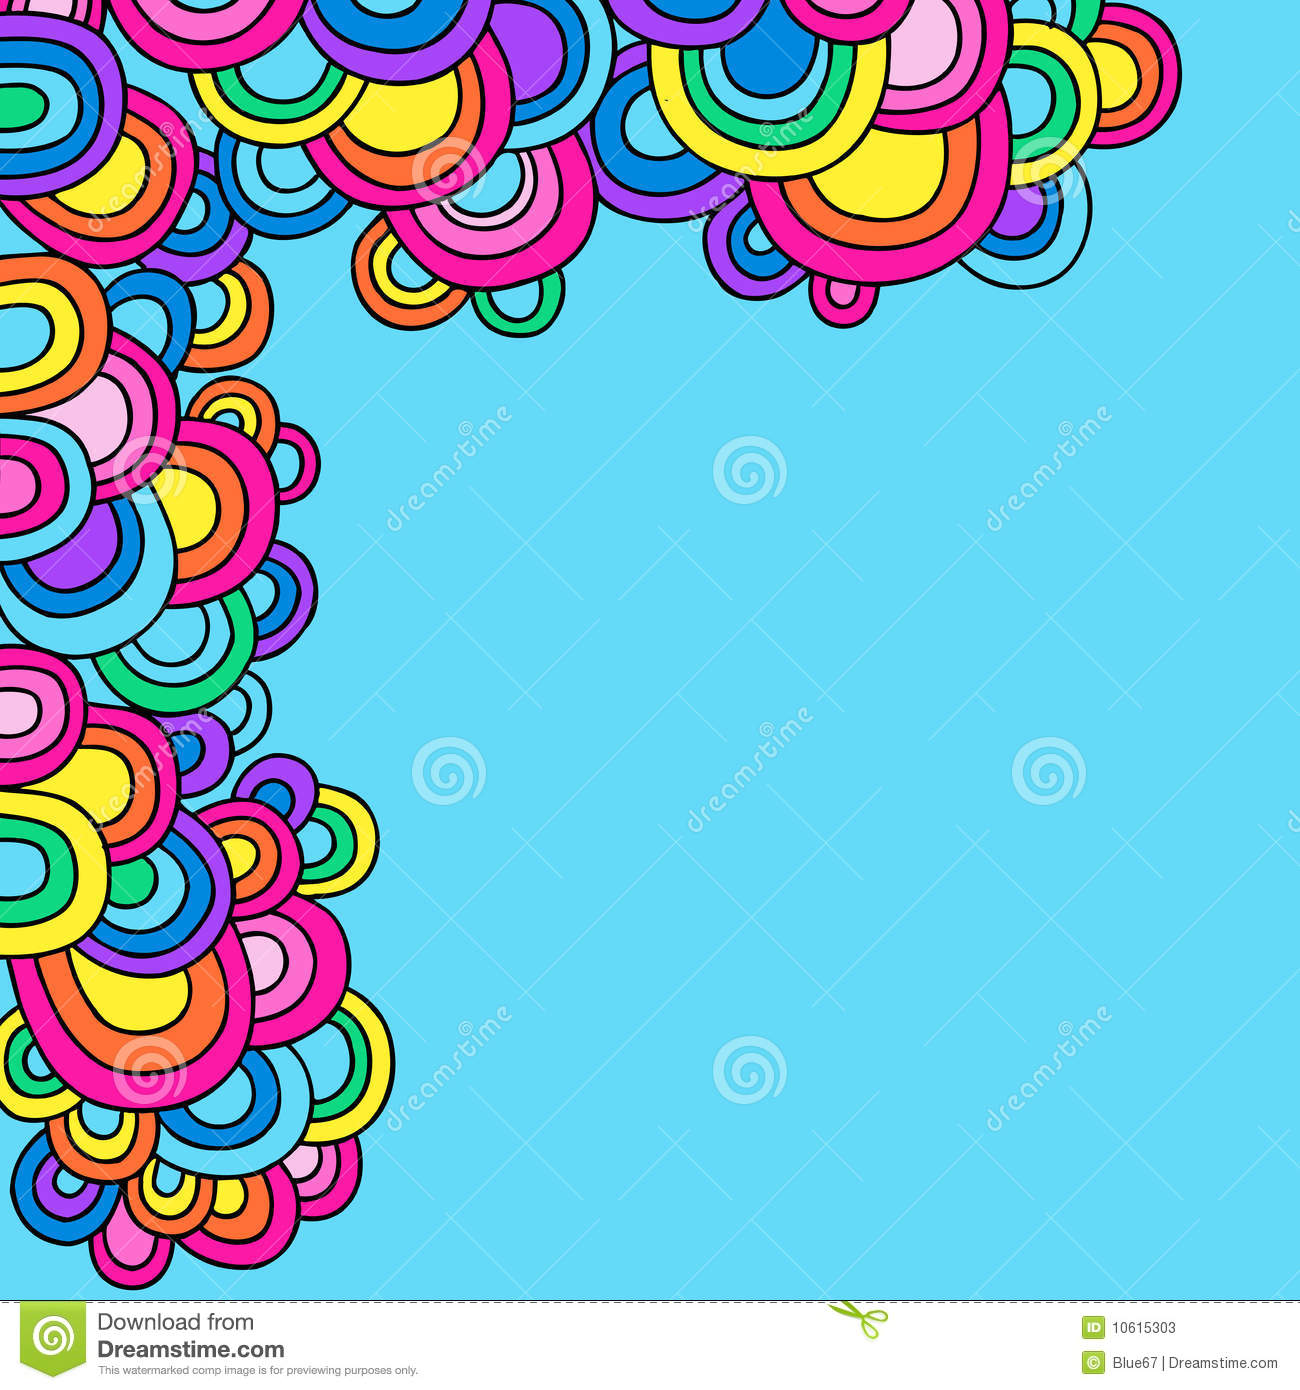 Groovy Hand Drawn Psychedelic Doodle Circle Border Vector Illustration